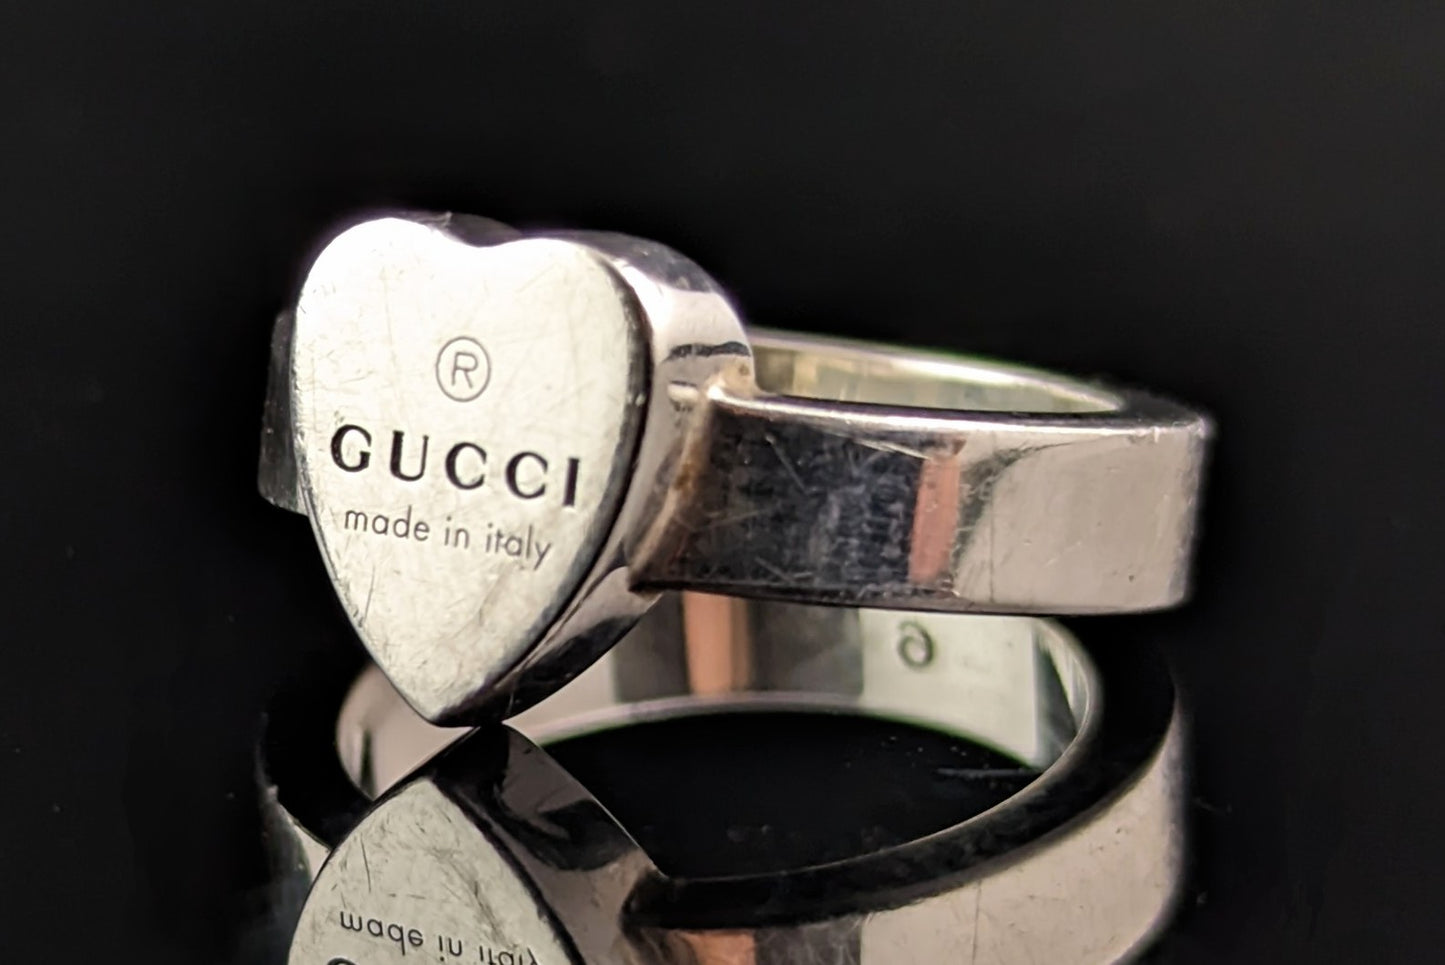 Gucci sterling silver heart trademark ring, boxed